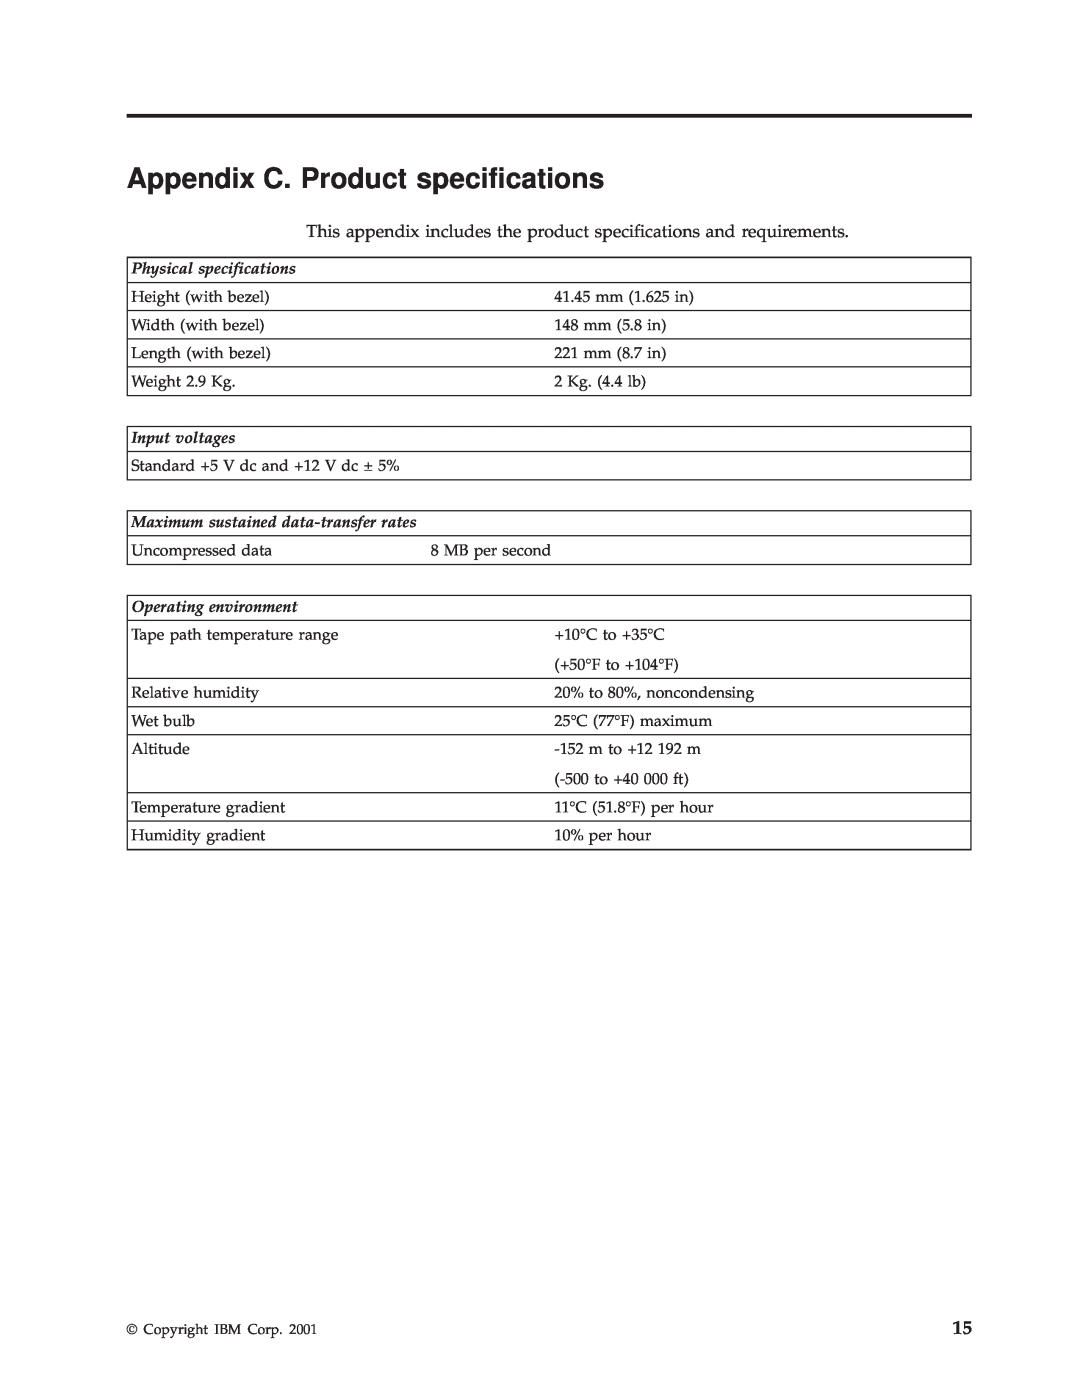 IBM HH LTO manual Appendix C. Product specifications, Physical specifications, Input voltages, Operating environment 